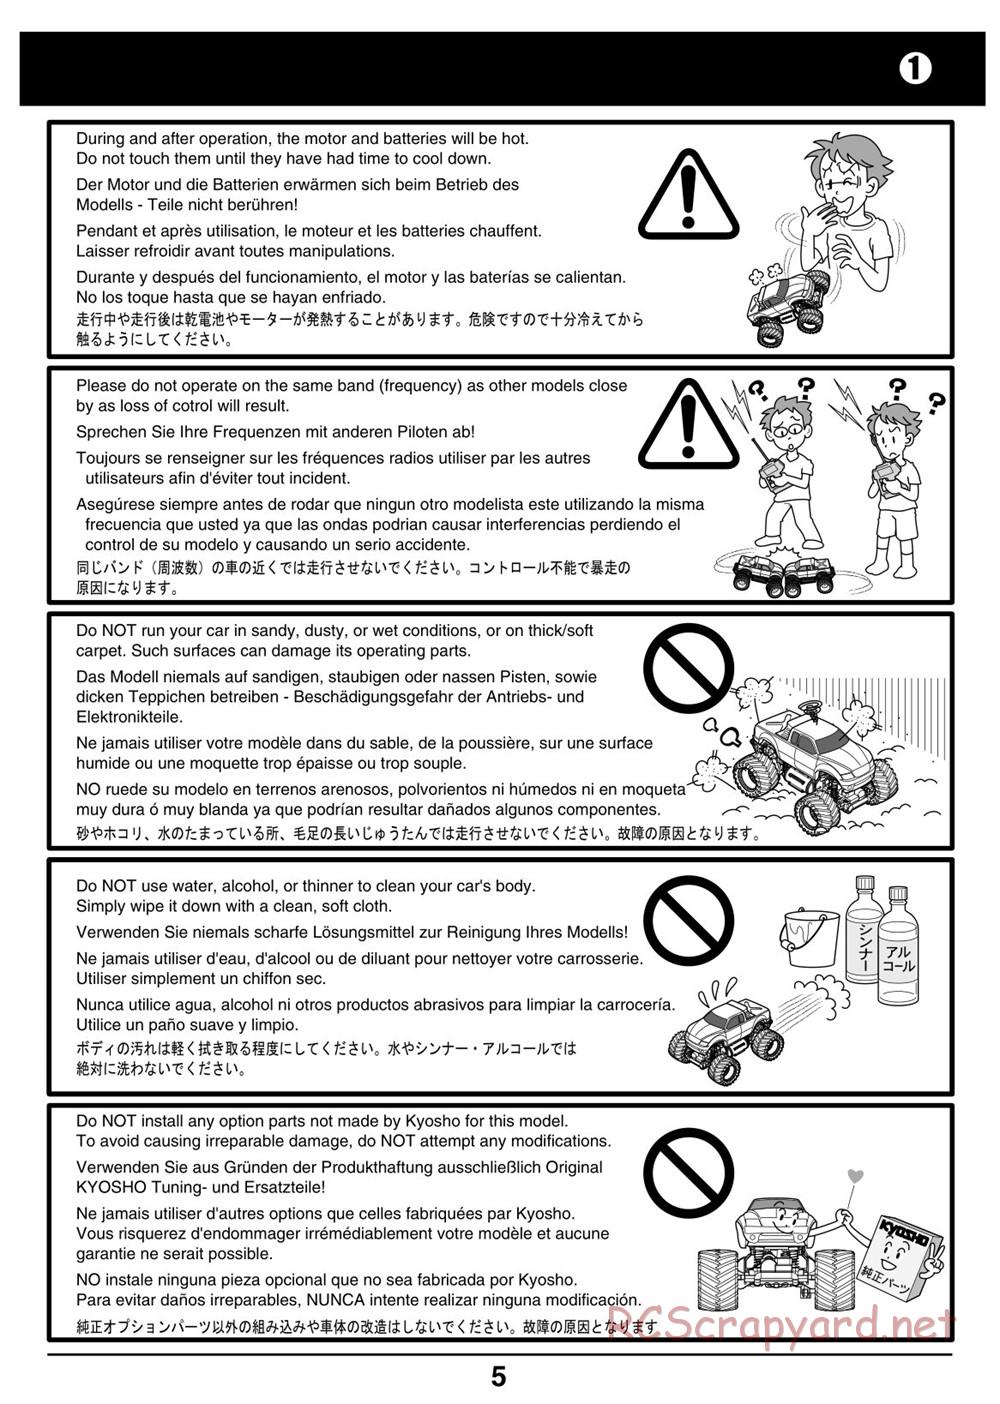 Kyosho - Mini-Z Monster Truck - Manual - Page 5